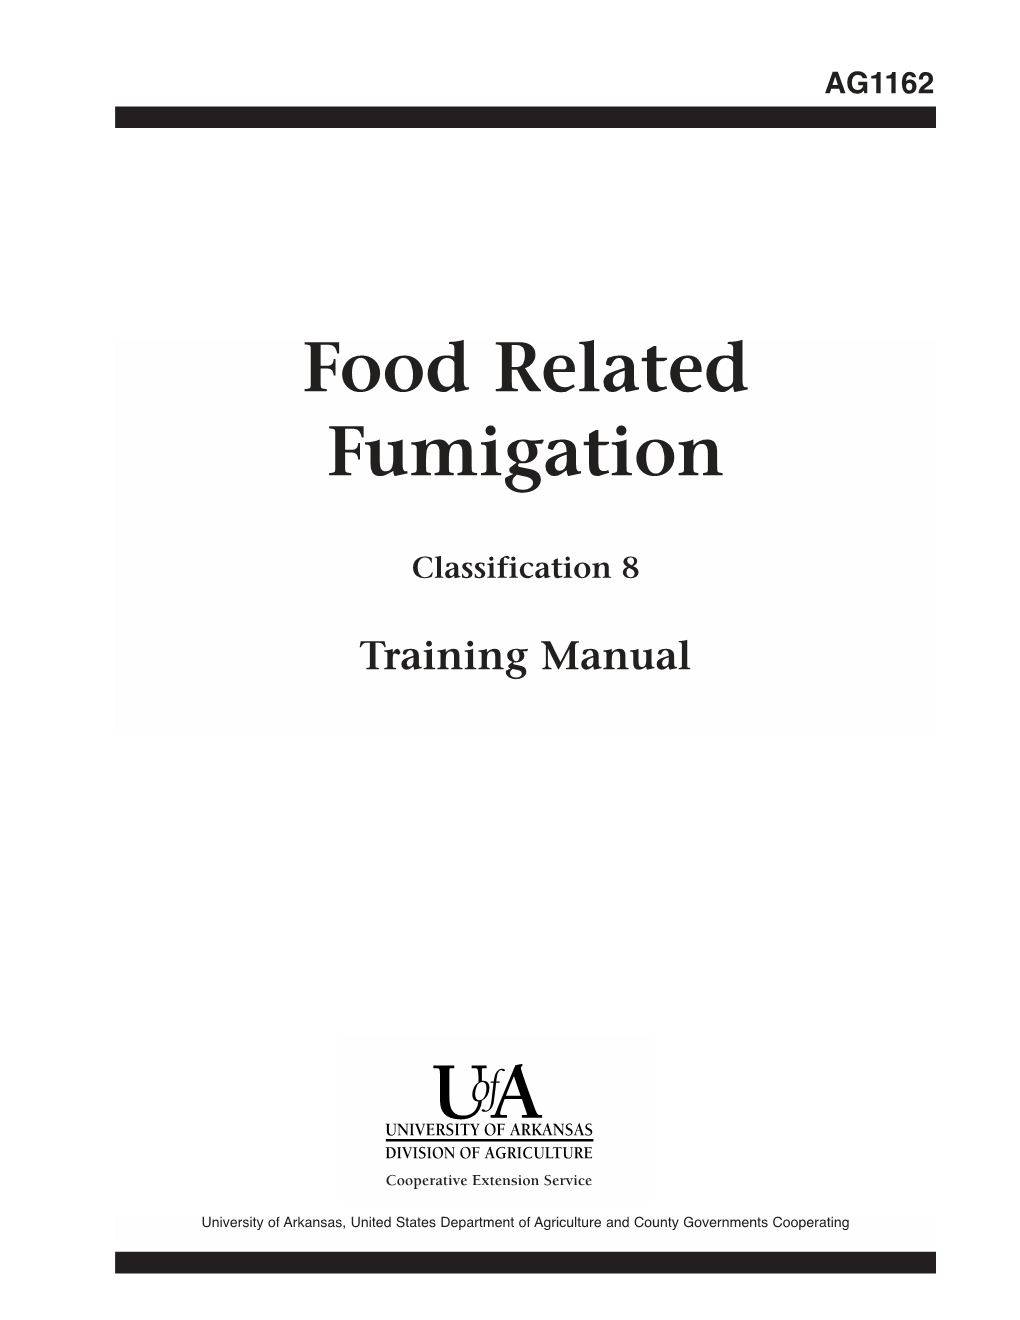 Food Related Fumigation Classification 8 Training Manual